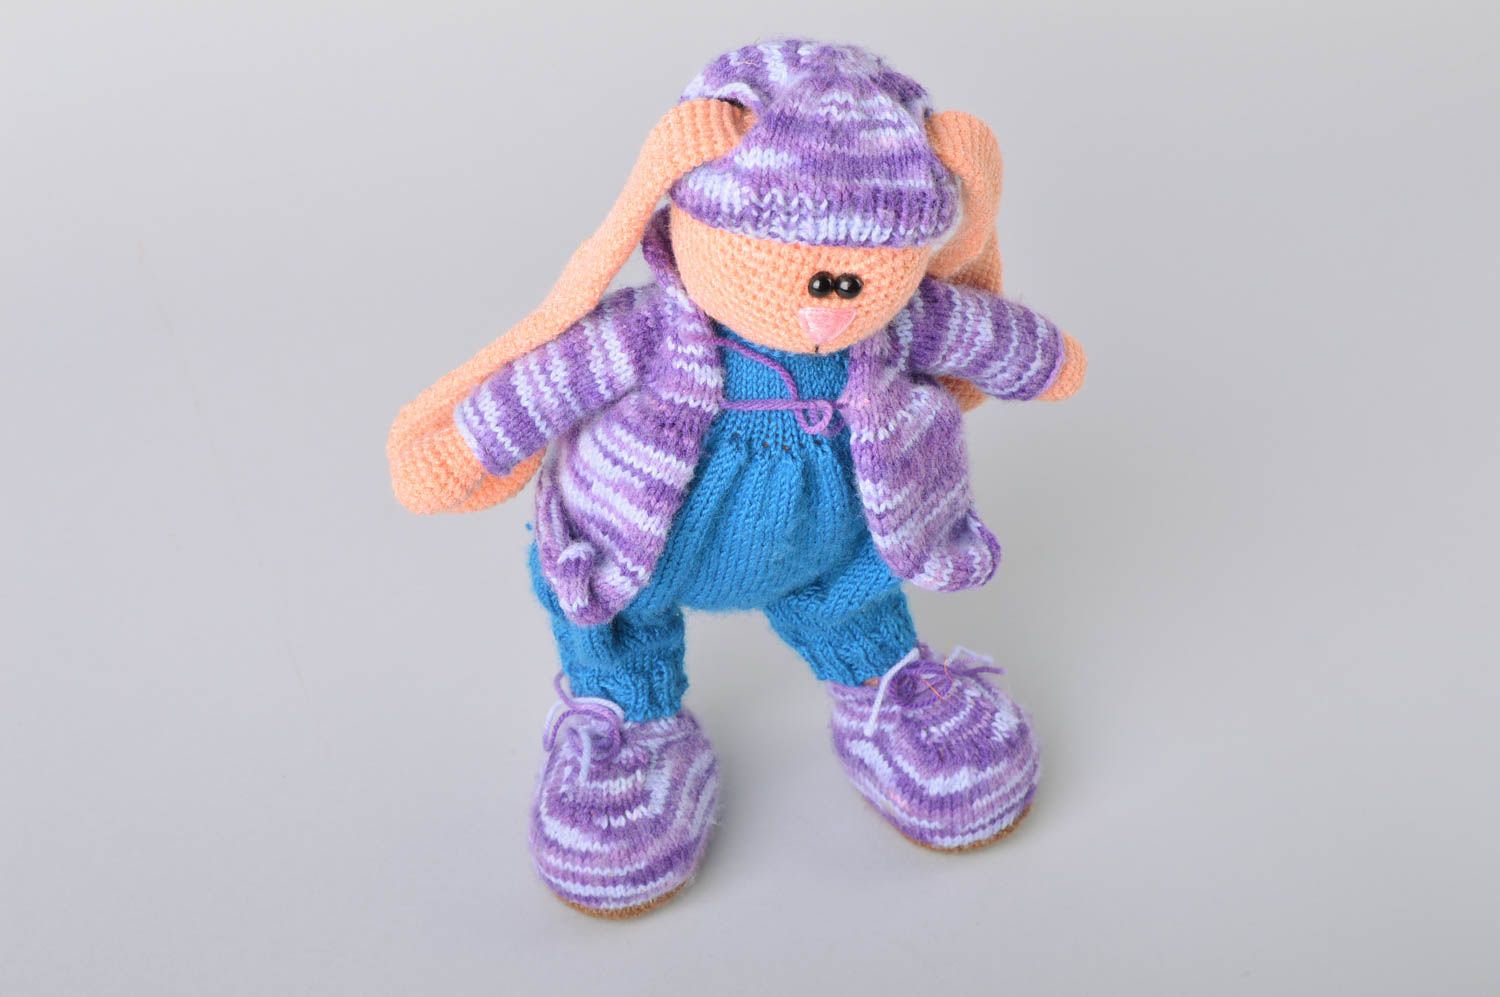 Handmade crocheted soft toy rabbit in blue knit clothing for children photo 3